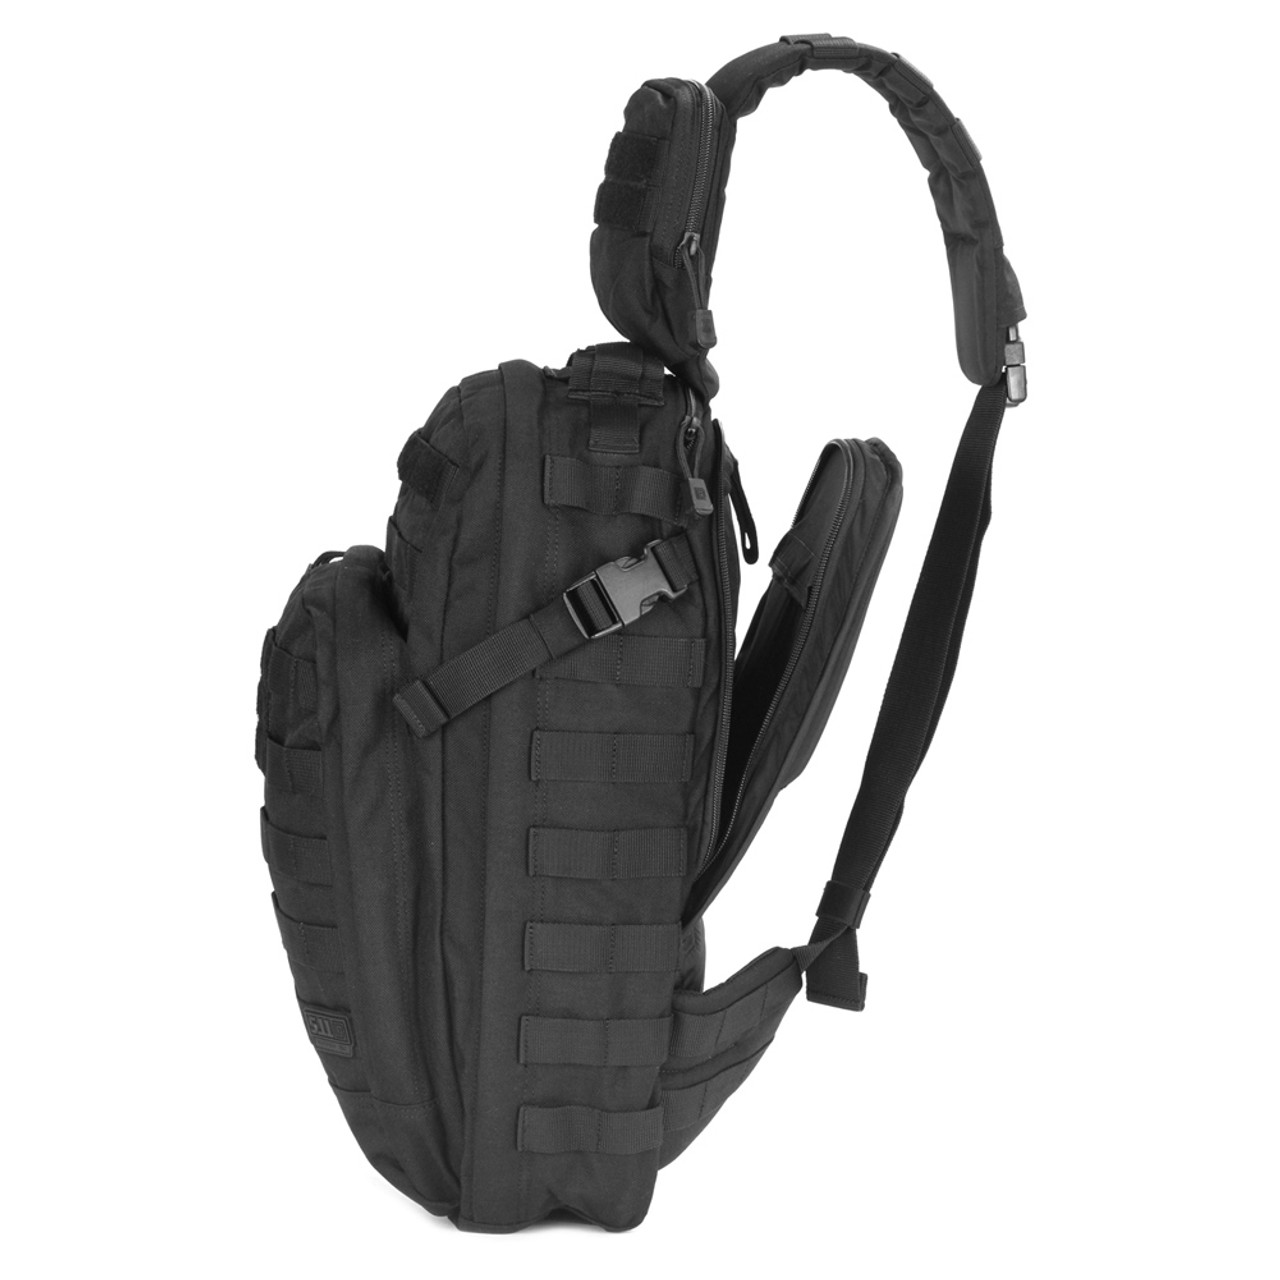  5.11 RUSH MOAB 10 Tactical Sling Pack Backpack, Style 56964,  Black : Hunting Duffle Bags : Sports & Outdoors